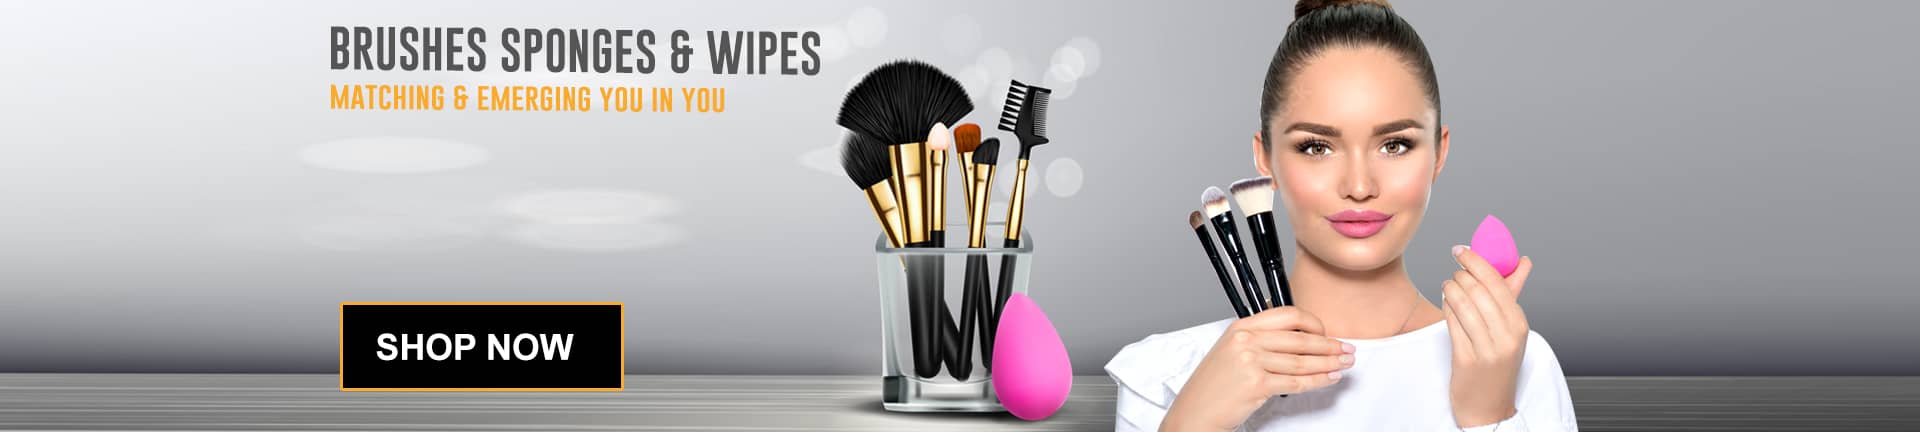 Buy Women's Brushes, Sponges & Wipes Product online @ Best Price